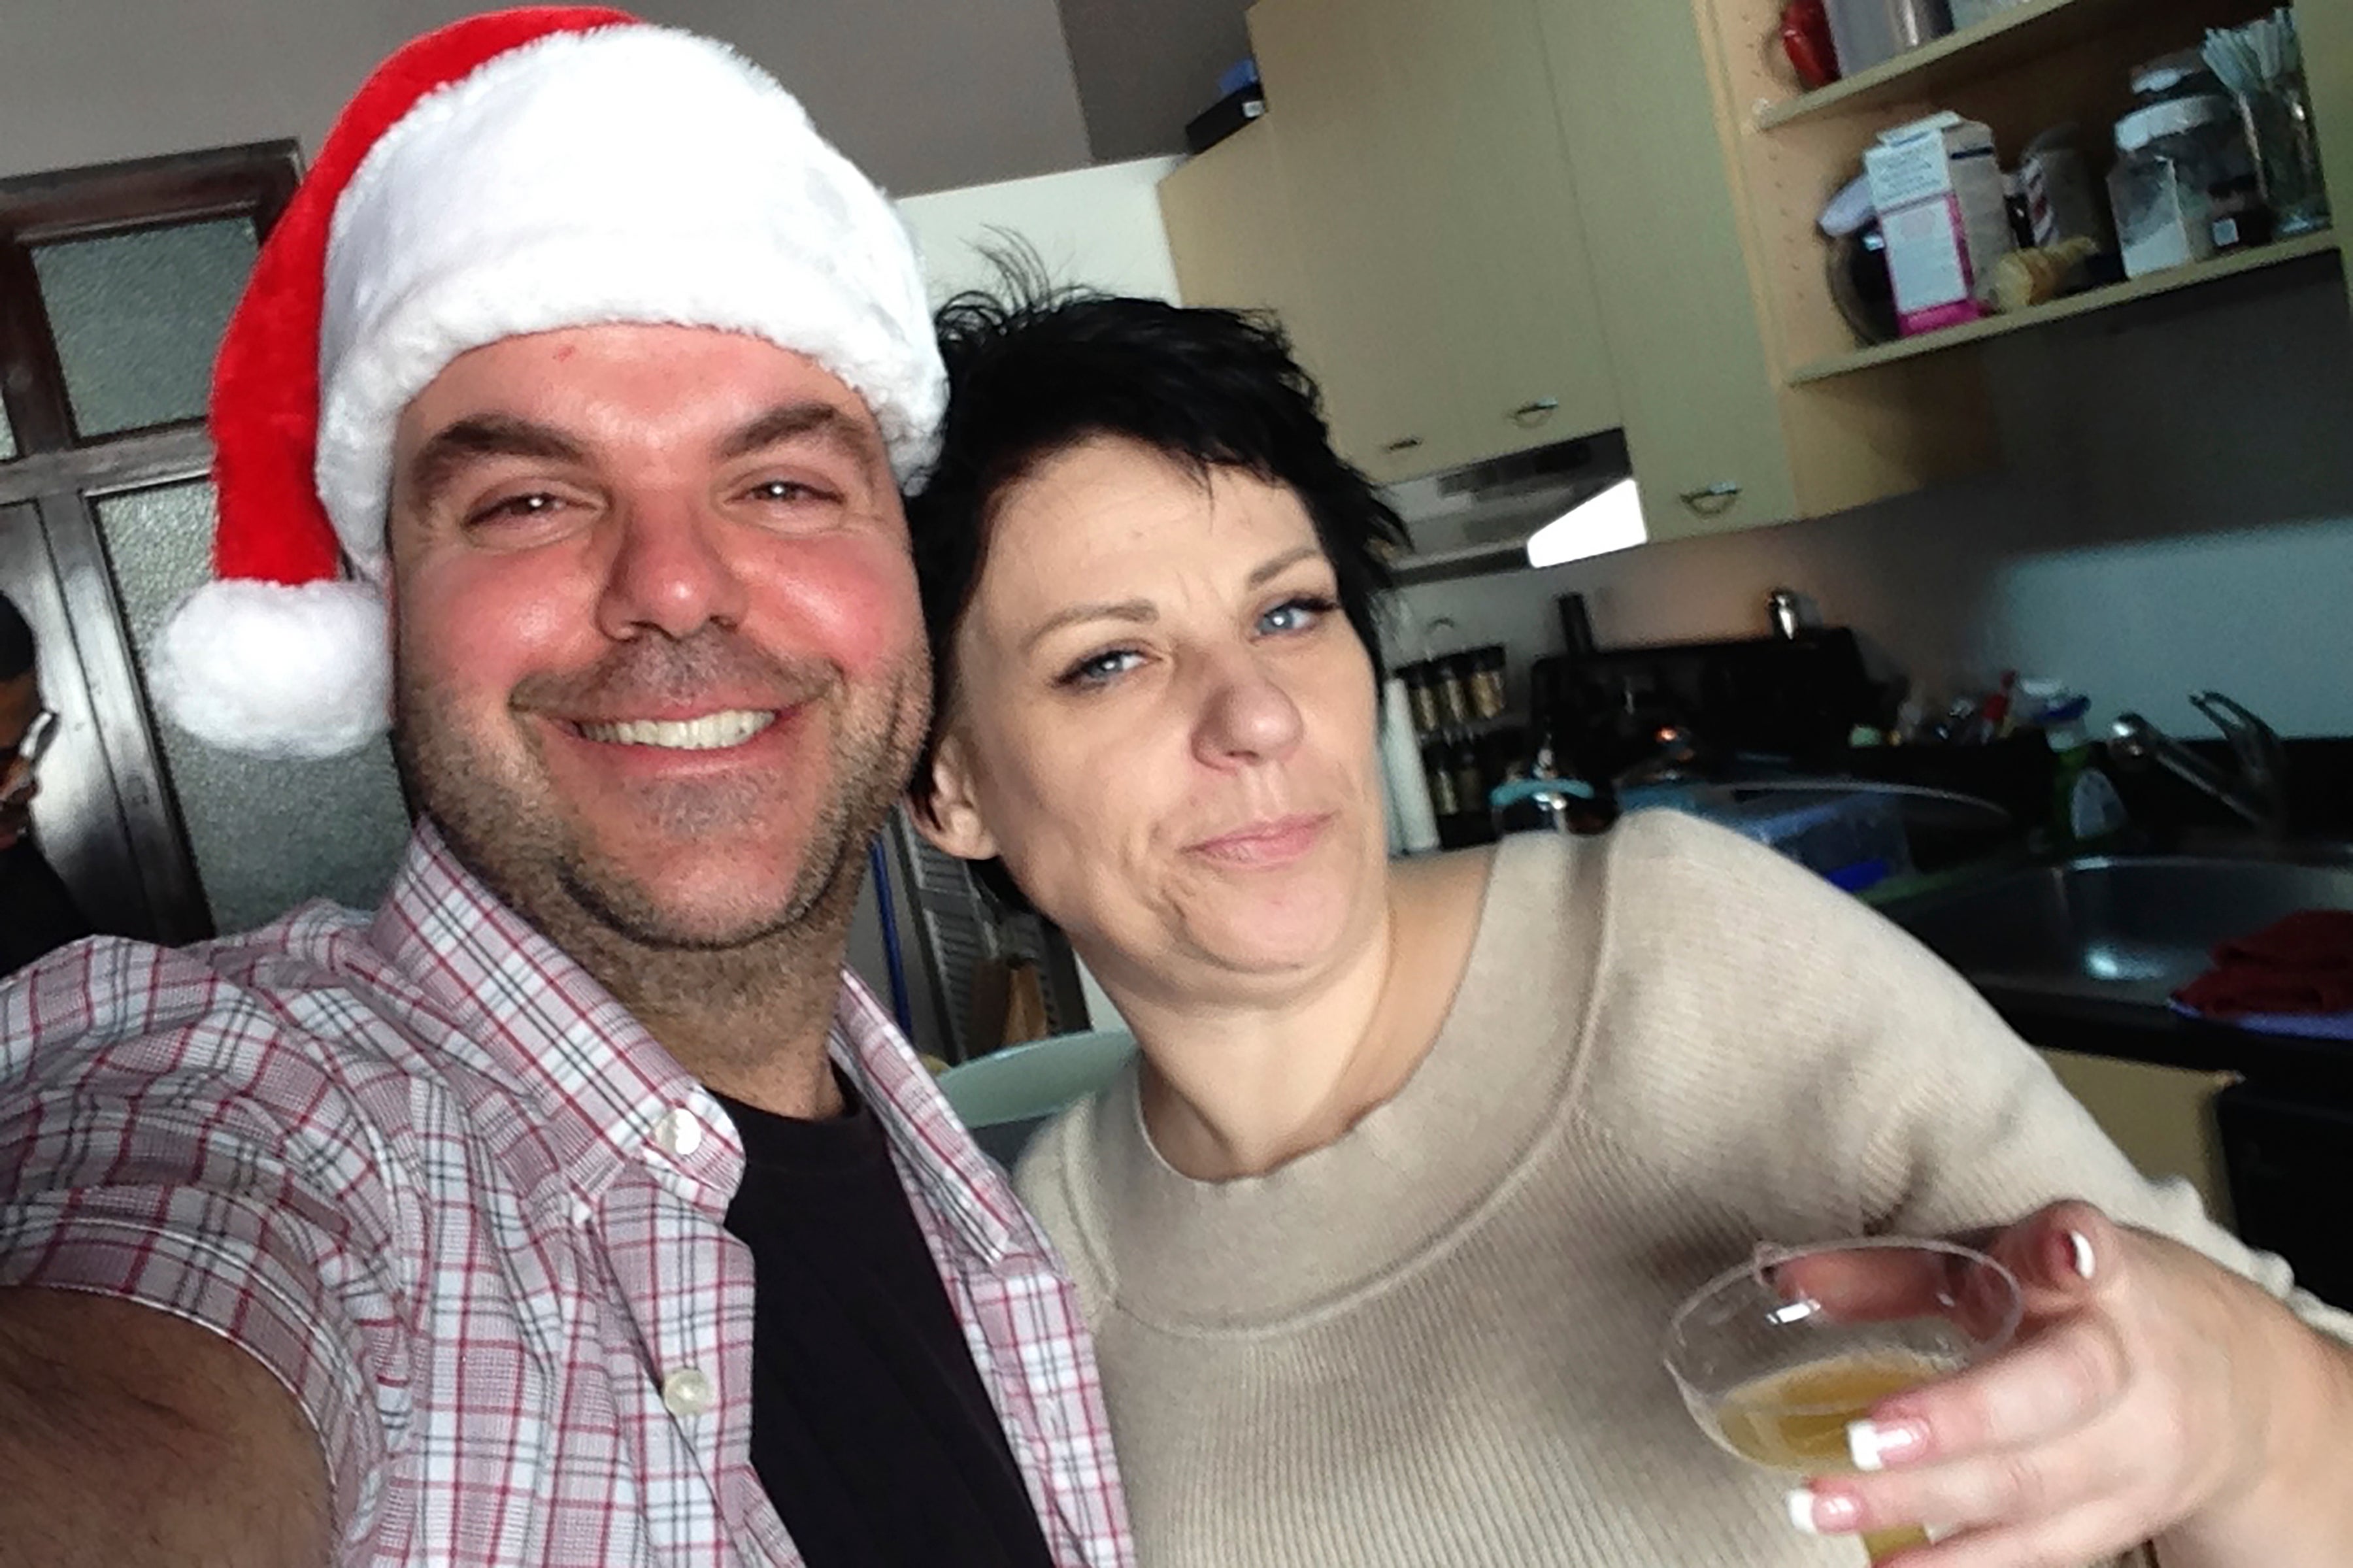 In this image provided by Johnathan Walton, Walton and Marianne “Mair” Smyth pose for a selfie in December 2013